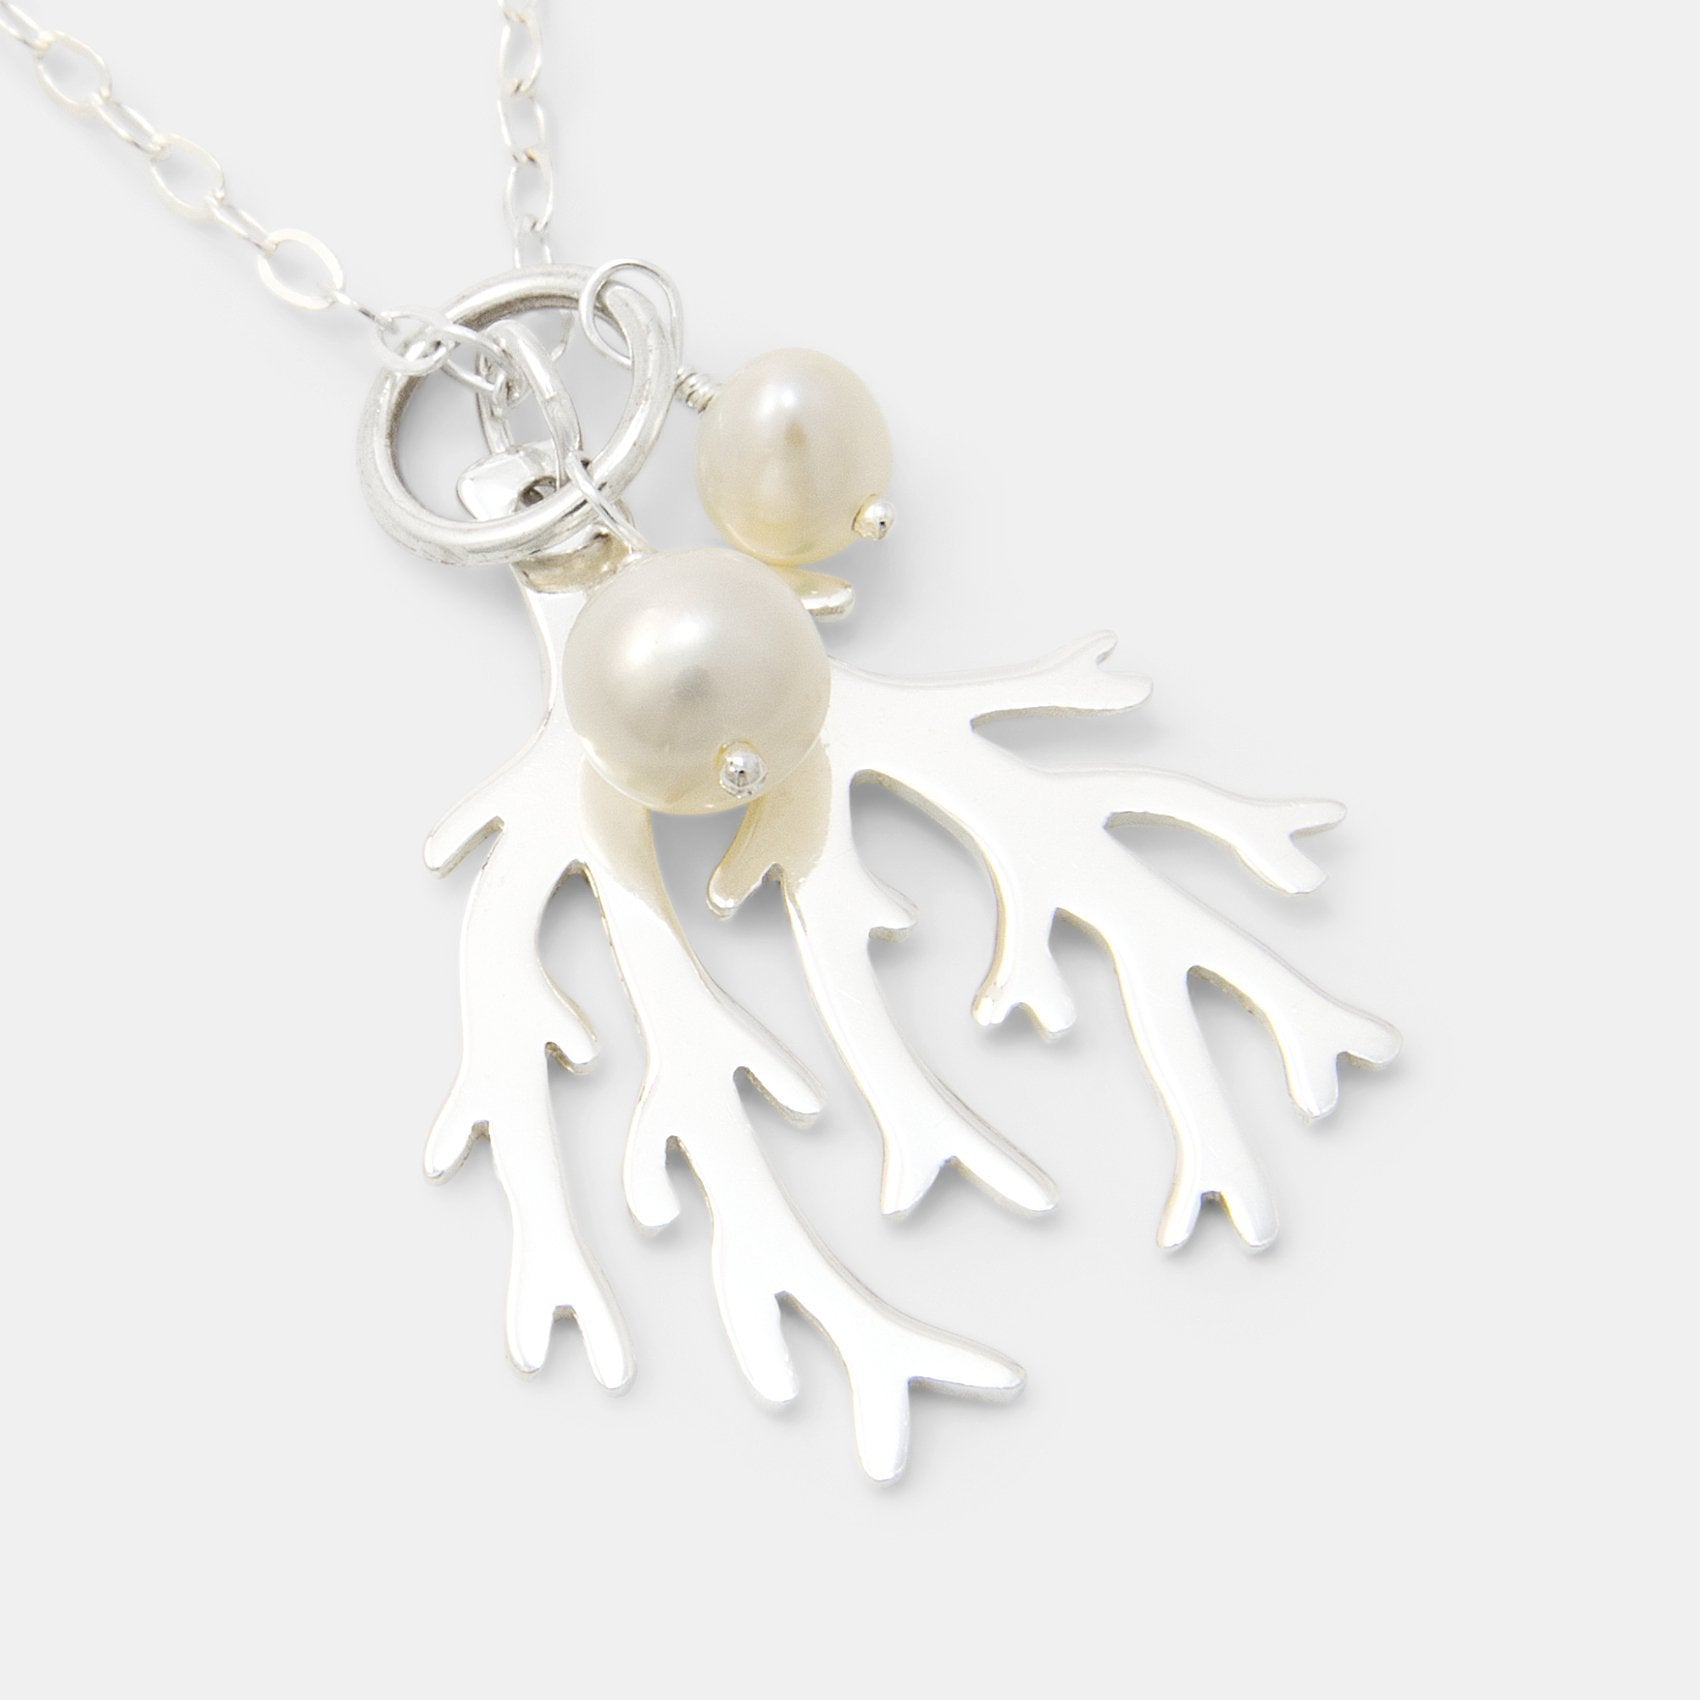 Branch coral & pearls silver pendant necklace - Simone Walsh Jewellery Australia